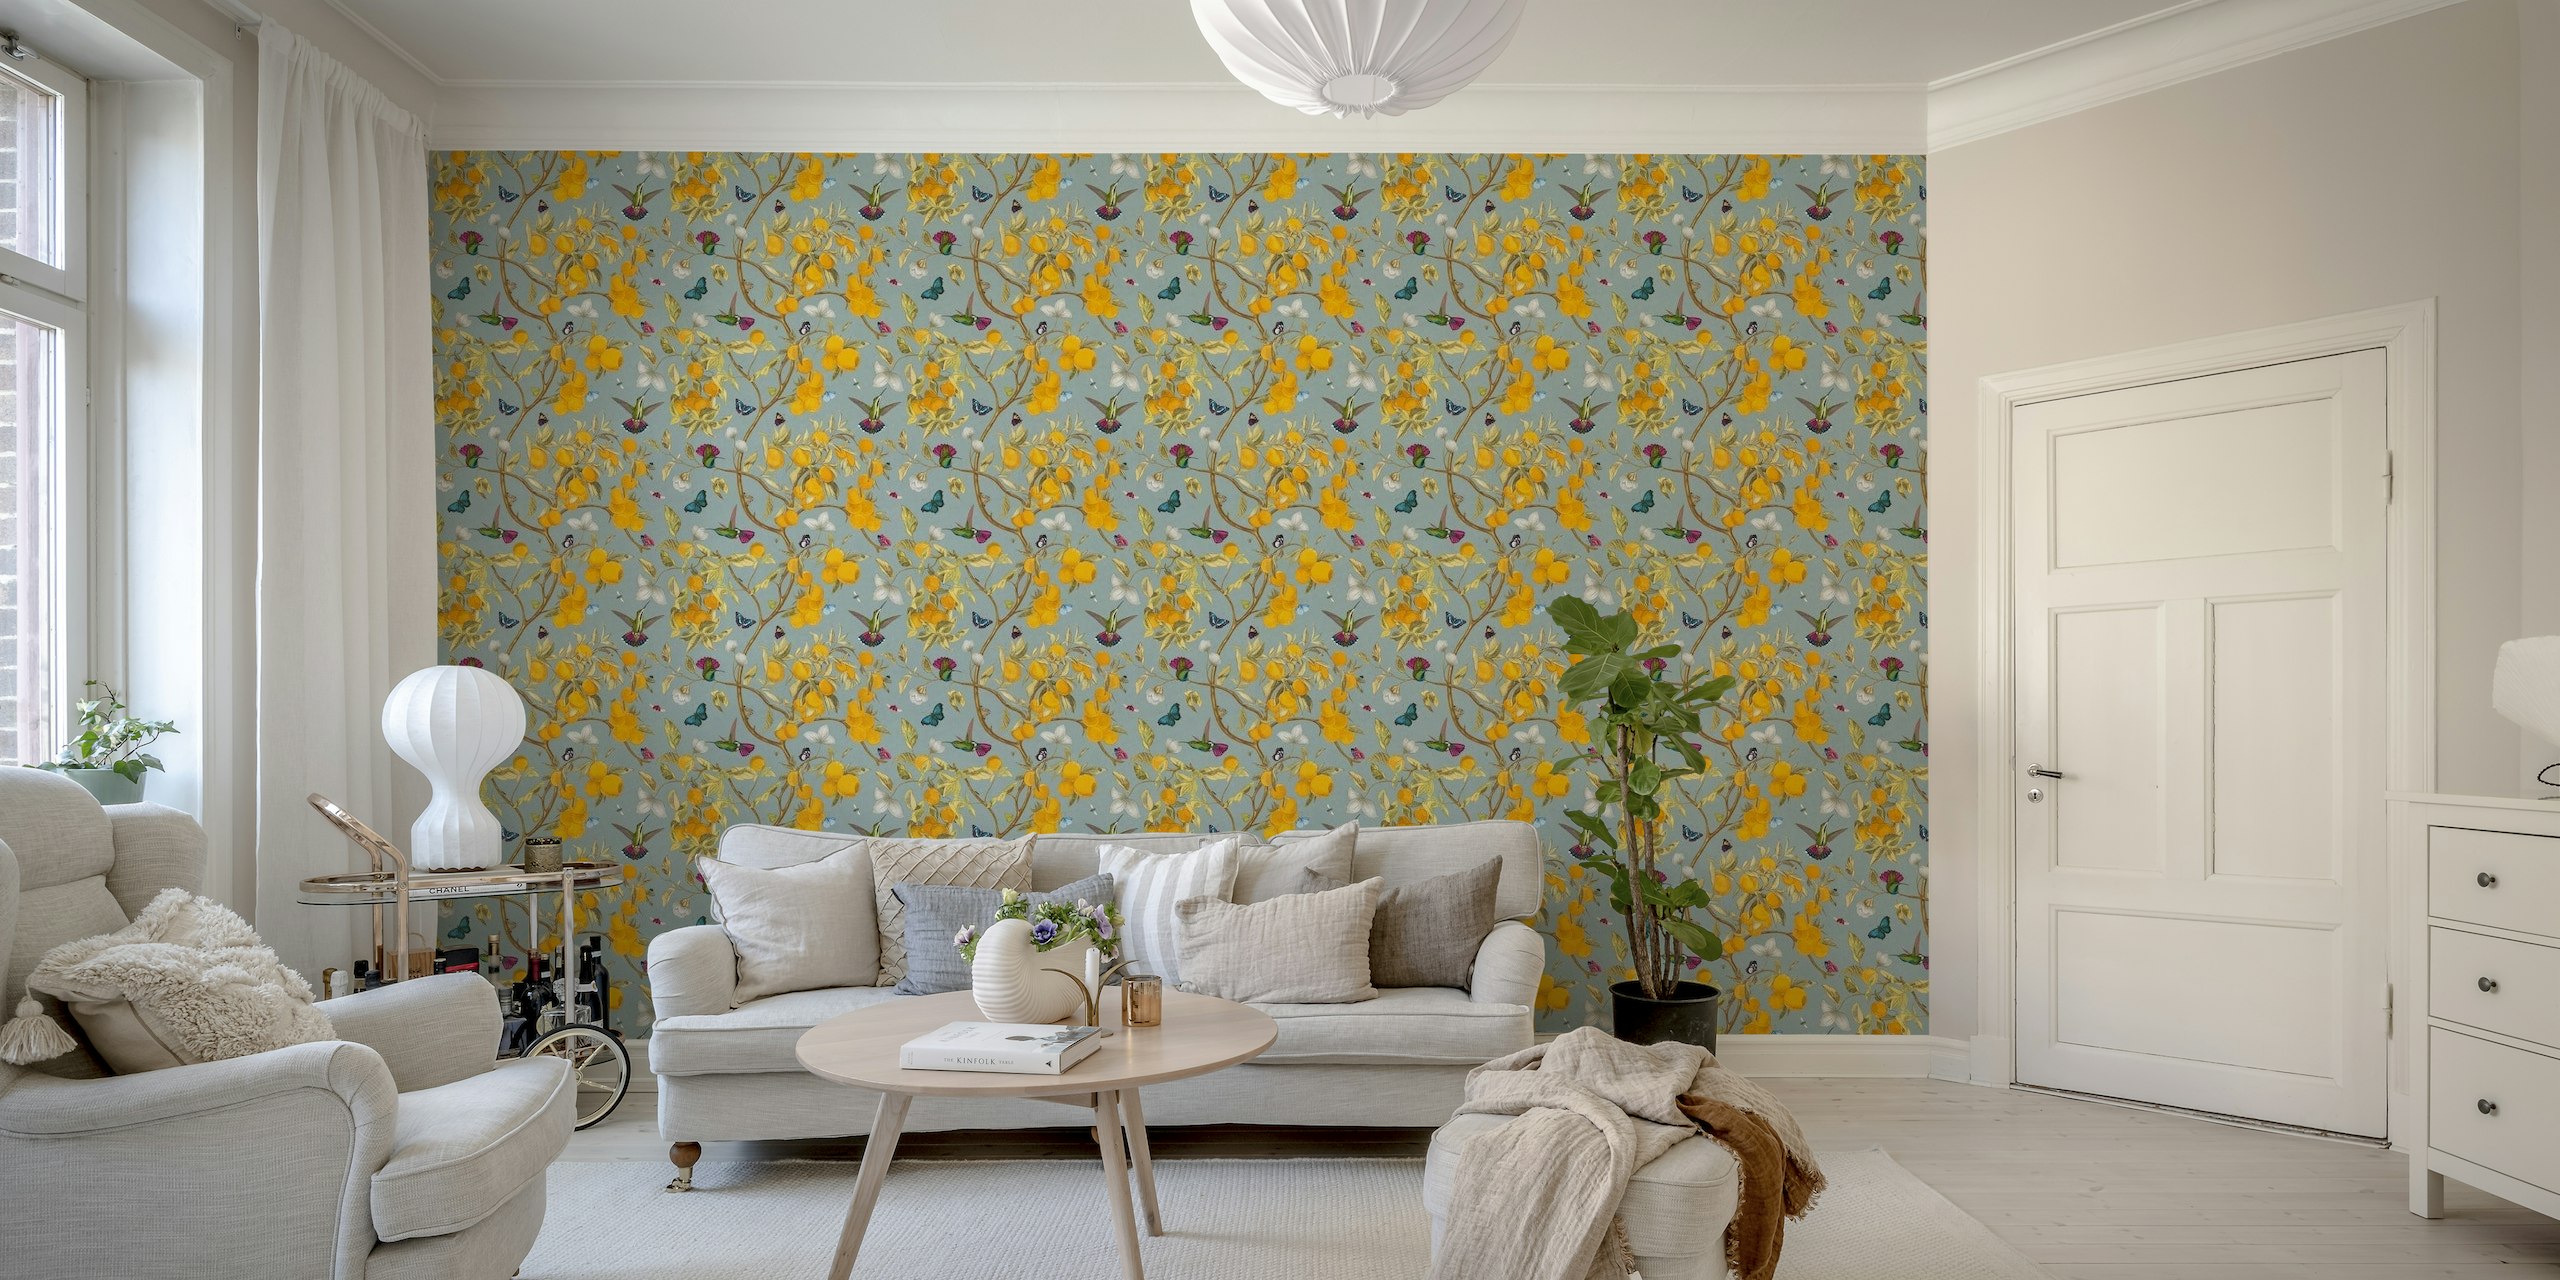 Wall mural with hummingbirds, lemons, and butterflies on a sky-blue background